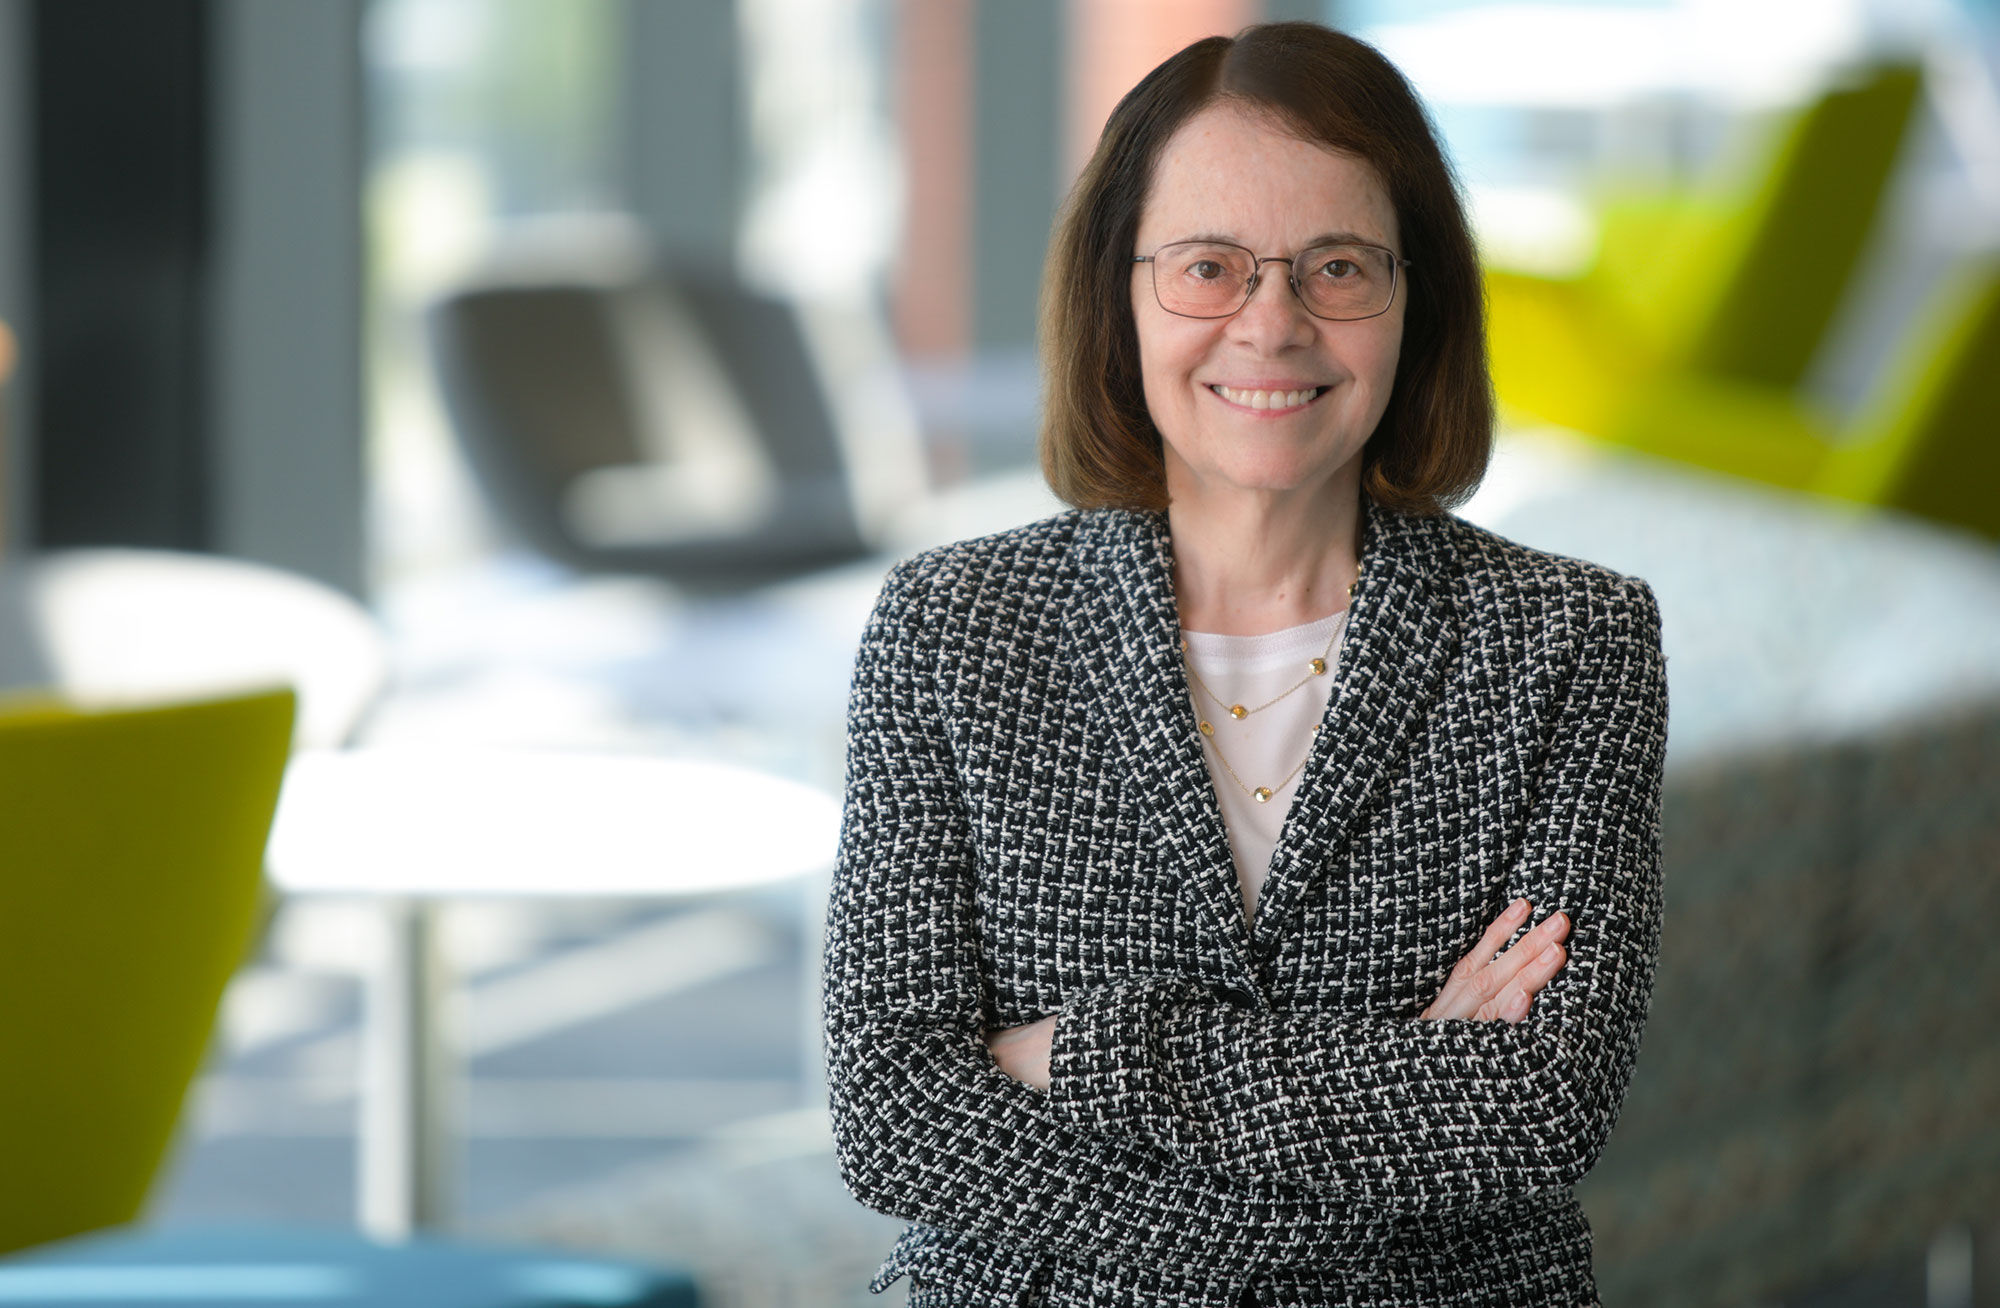 Mass General Brigham President and CEO Anne Klibanski, MD, Recognized by Modern Healthcare as one of the 100 Most Influential People in Healthcare